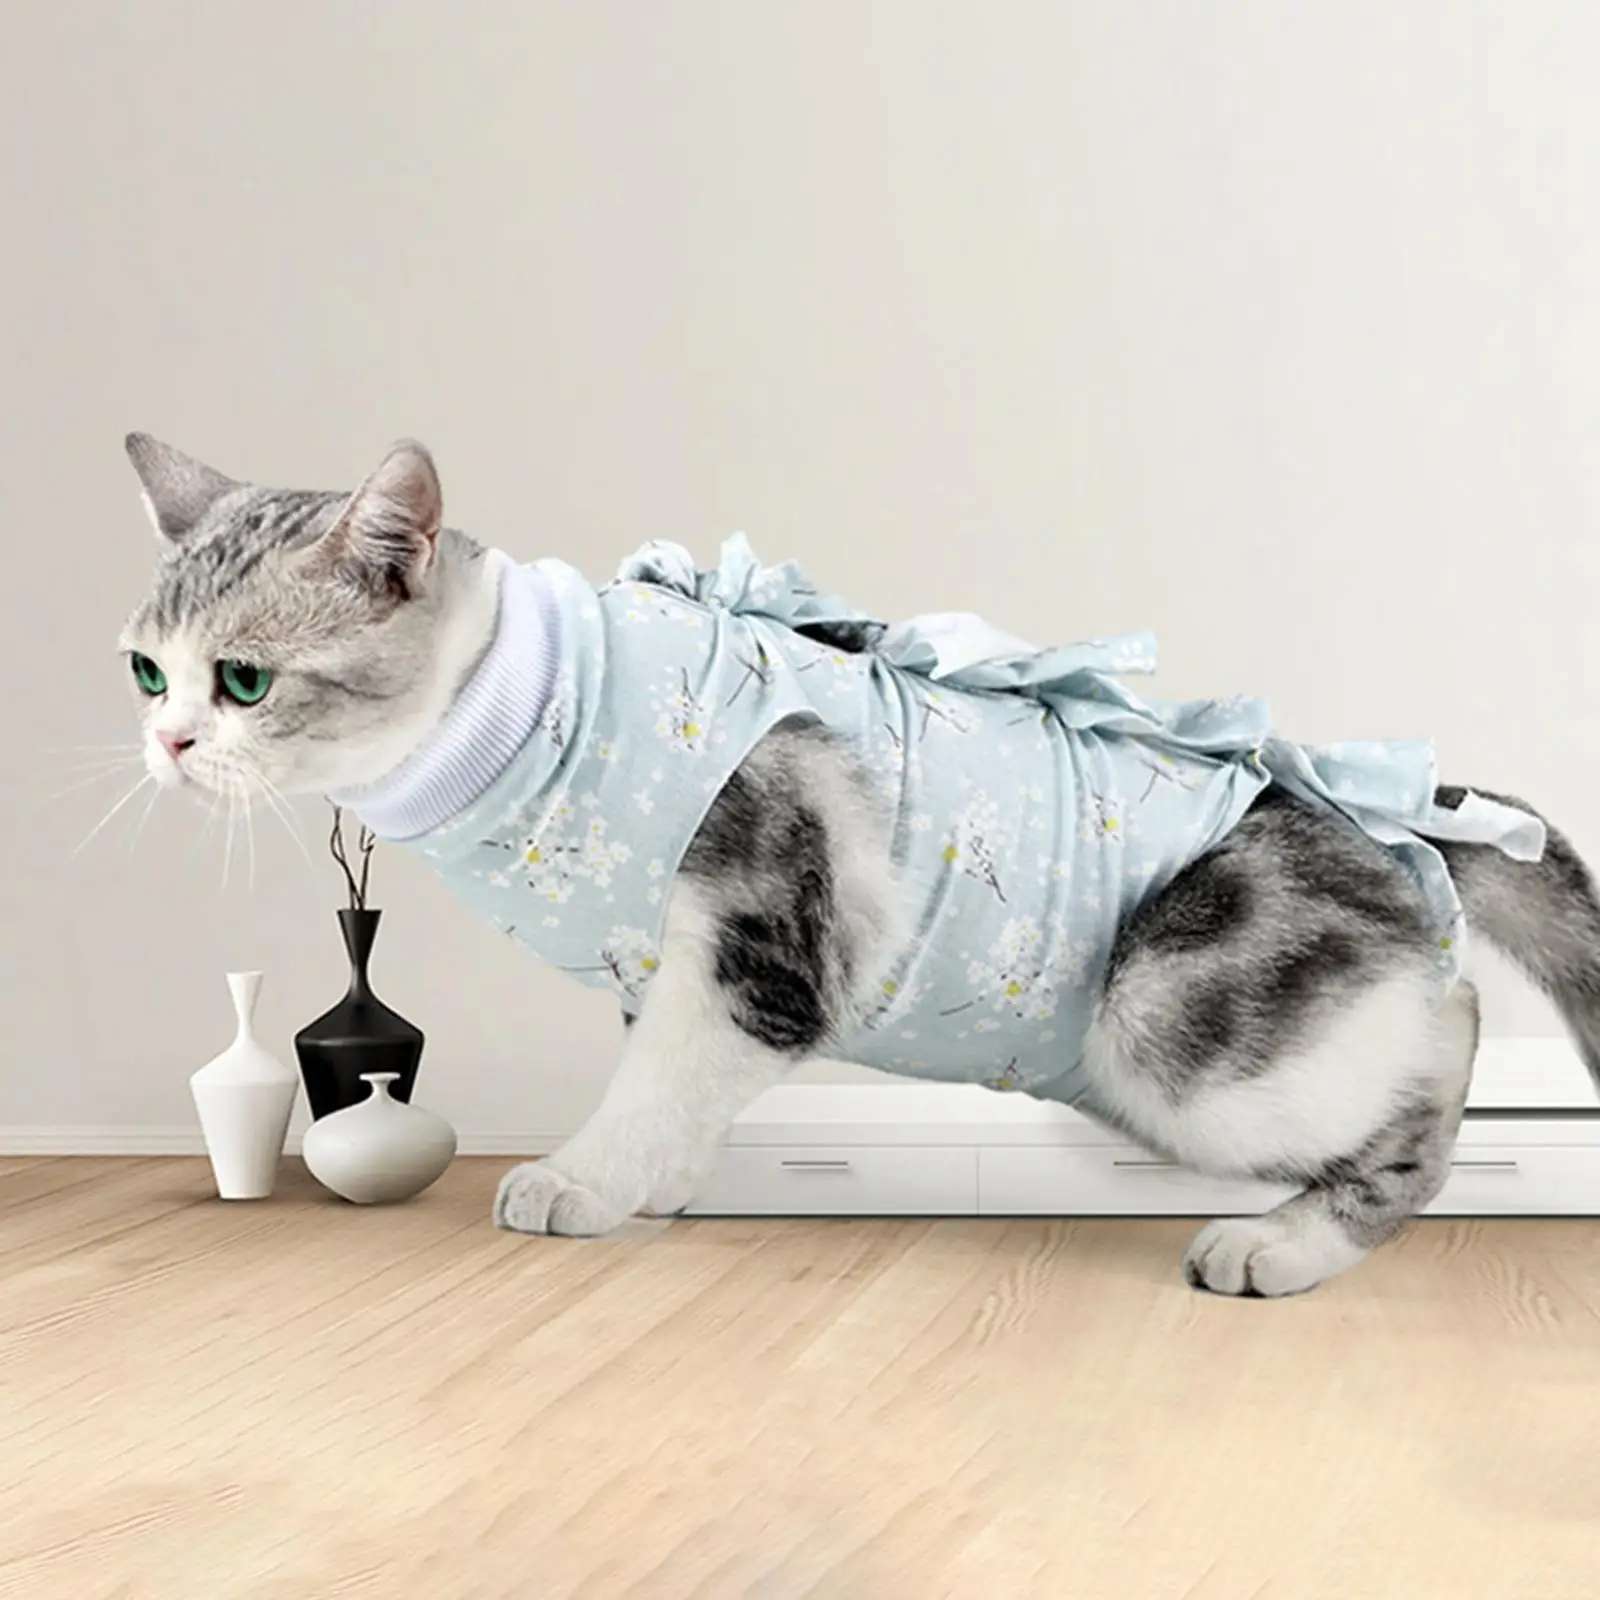 Cat Recovery Suit Clothes Professional Vest Breathable Soft for Skin Abdominal Wounds After Surgery Puppy Home